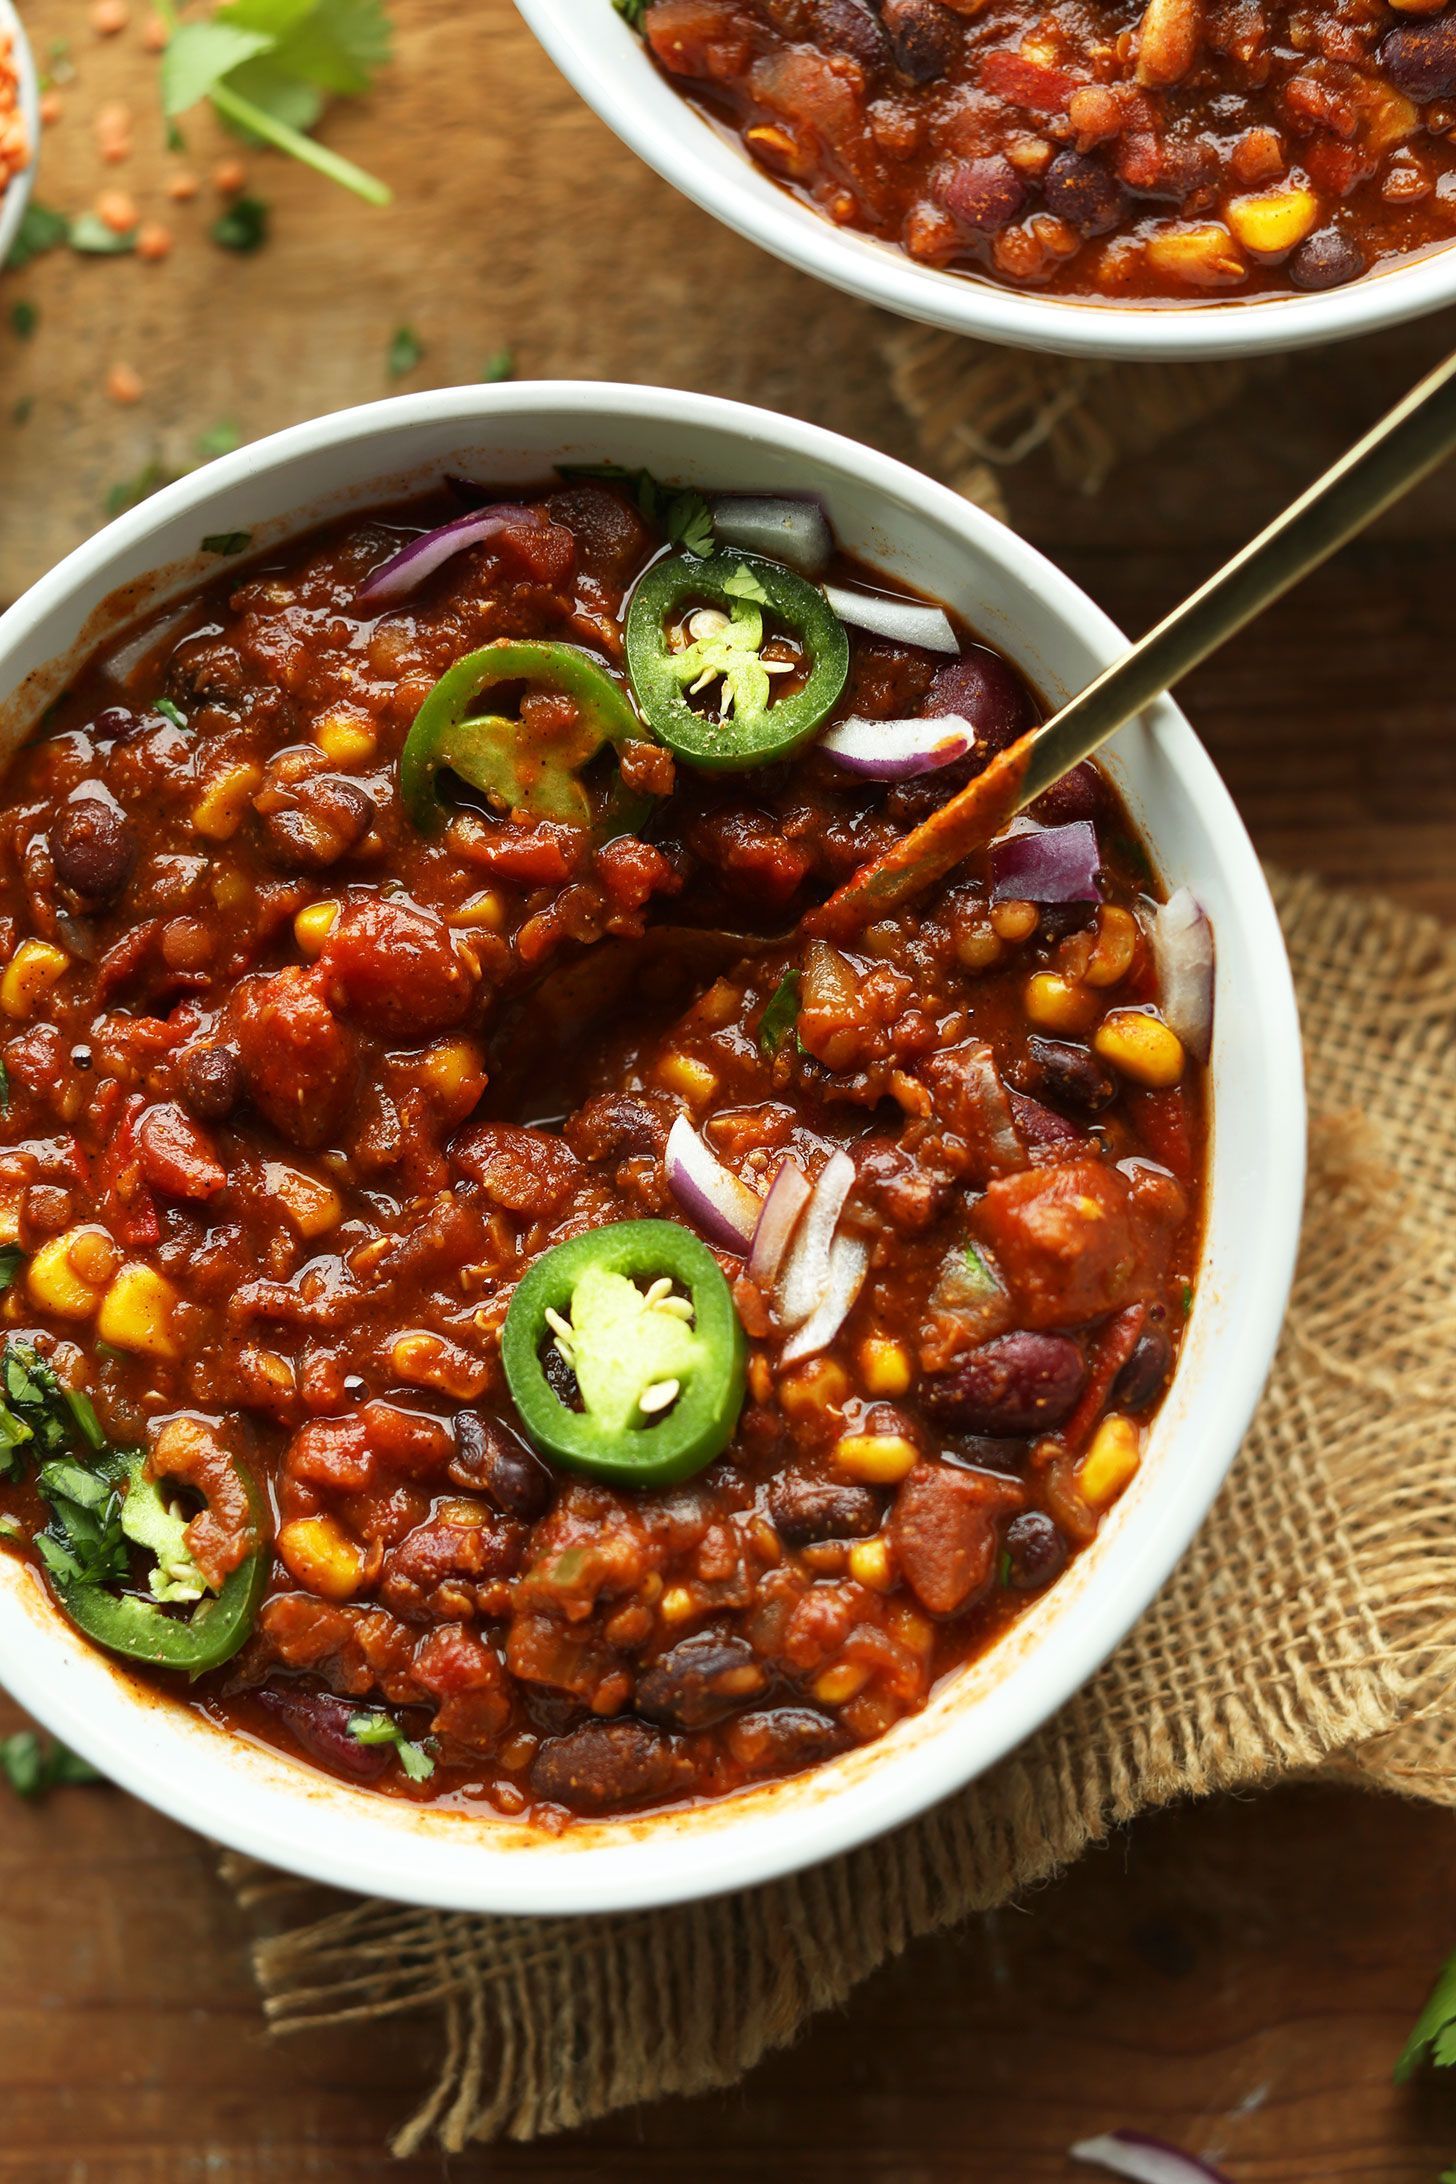 Hearty red lentil chili made in 1 pot with simple ingredients! A smoky, flavorful, protein- and fiber-rich plant-based meal